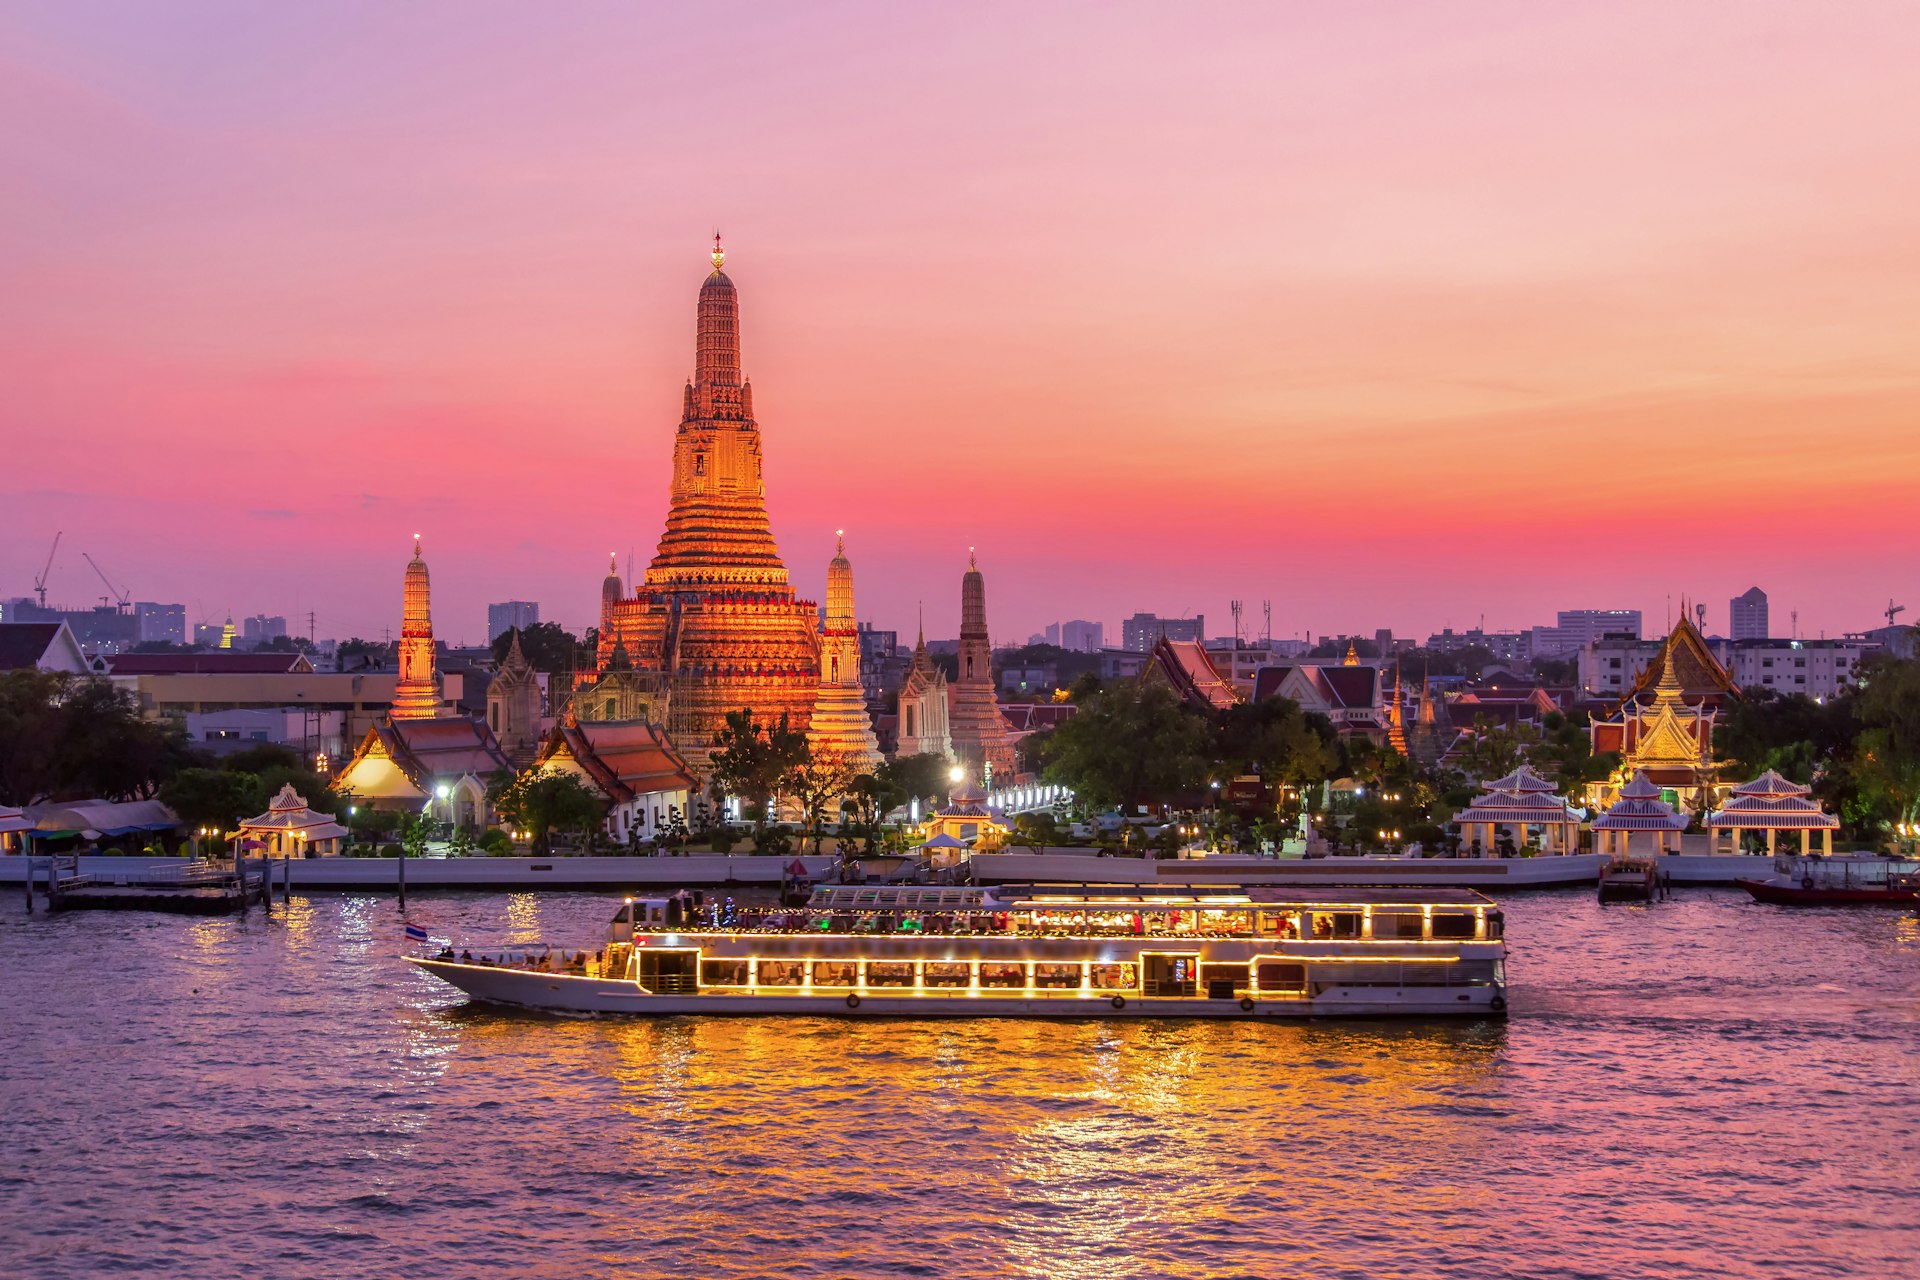 A white river cruise ships passes the stupa of Wat Arun in Bangkok under the soft glaze of an apricot-colored sunset